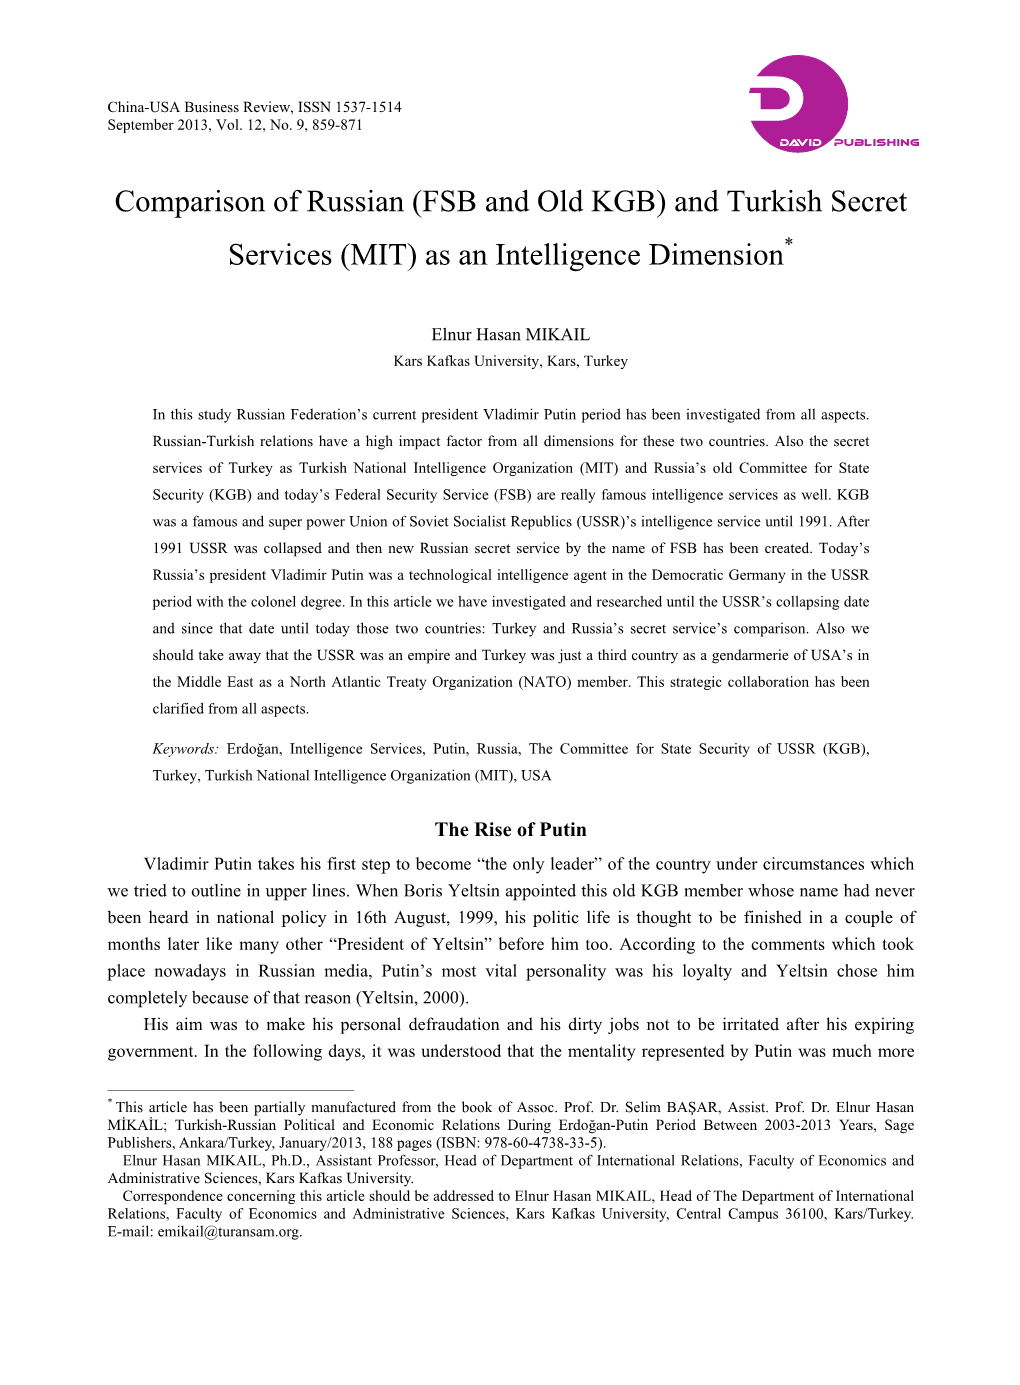 (FSB and Old KGB) and Turkish Secret Services (MIT) As an Intelligence Dimension*